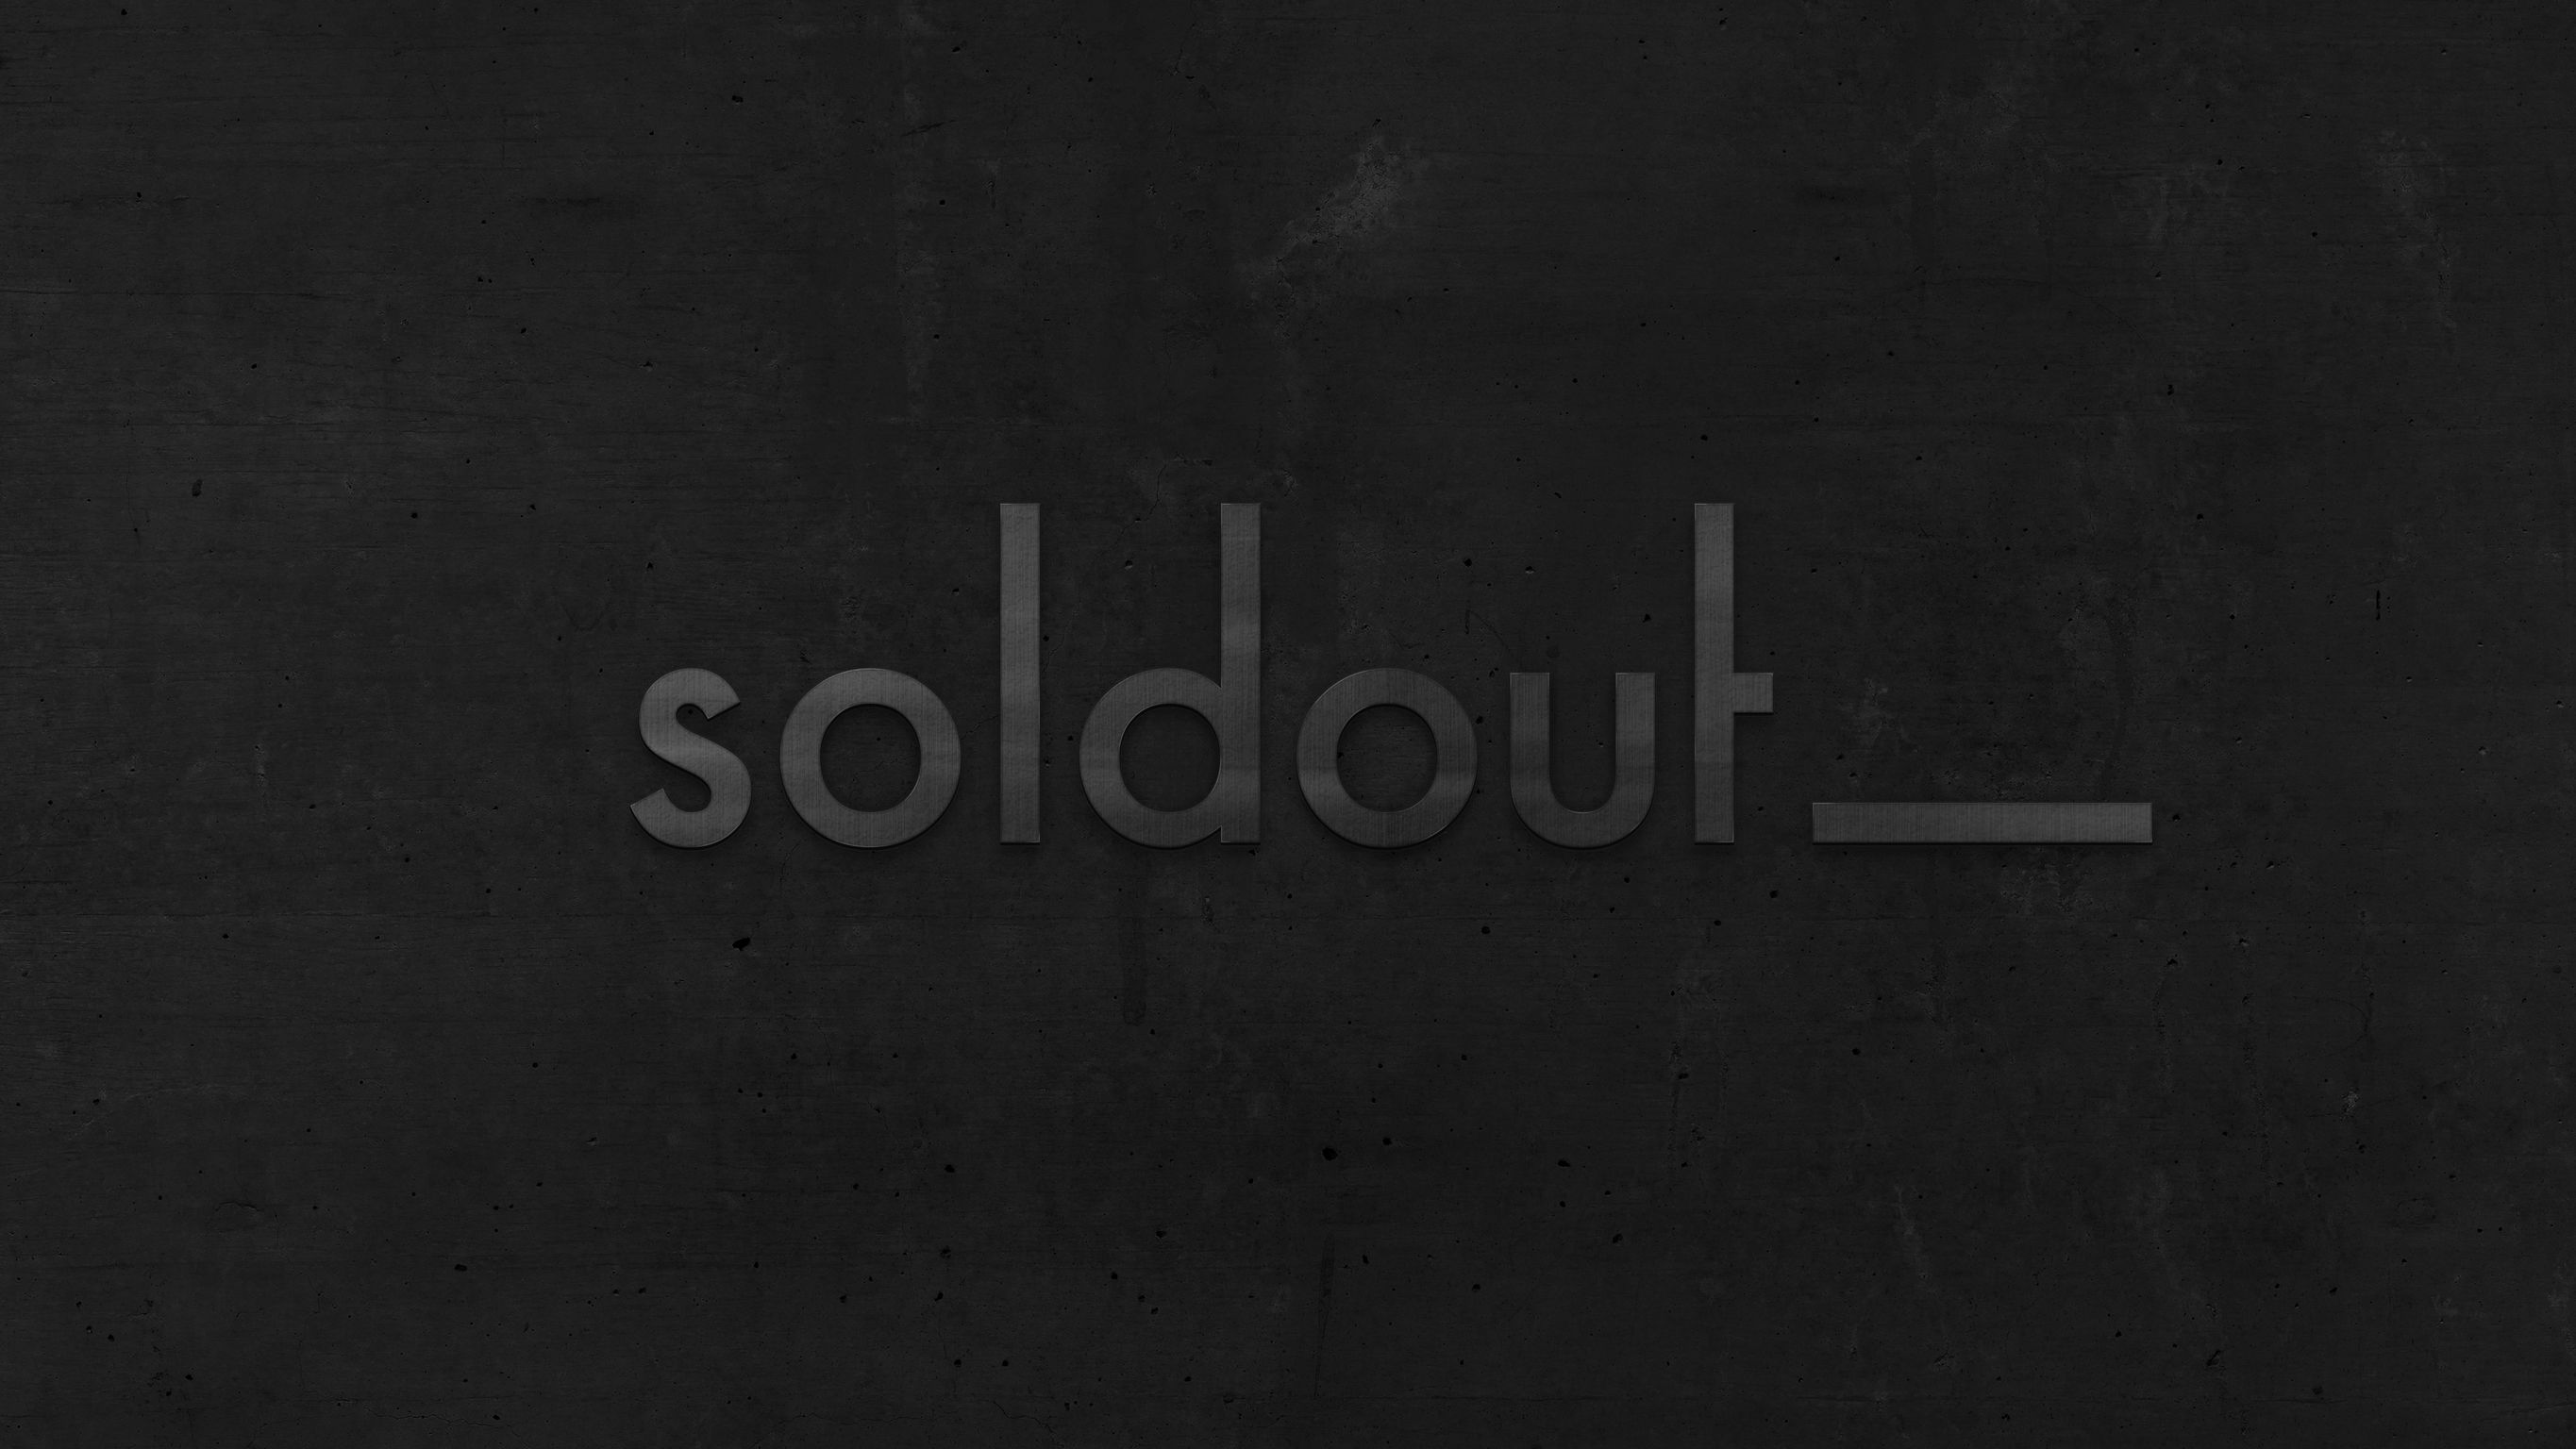 soldout_